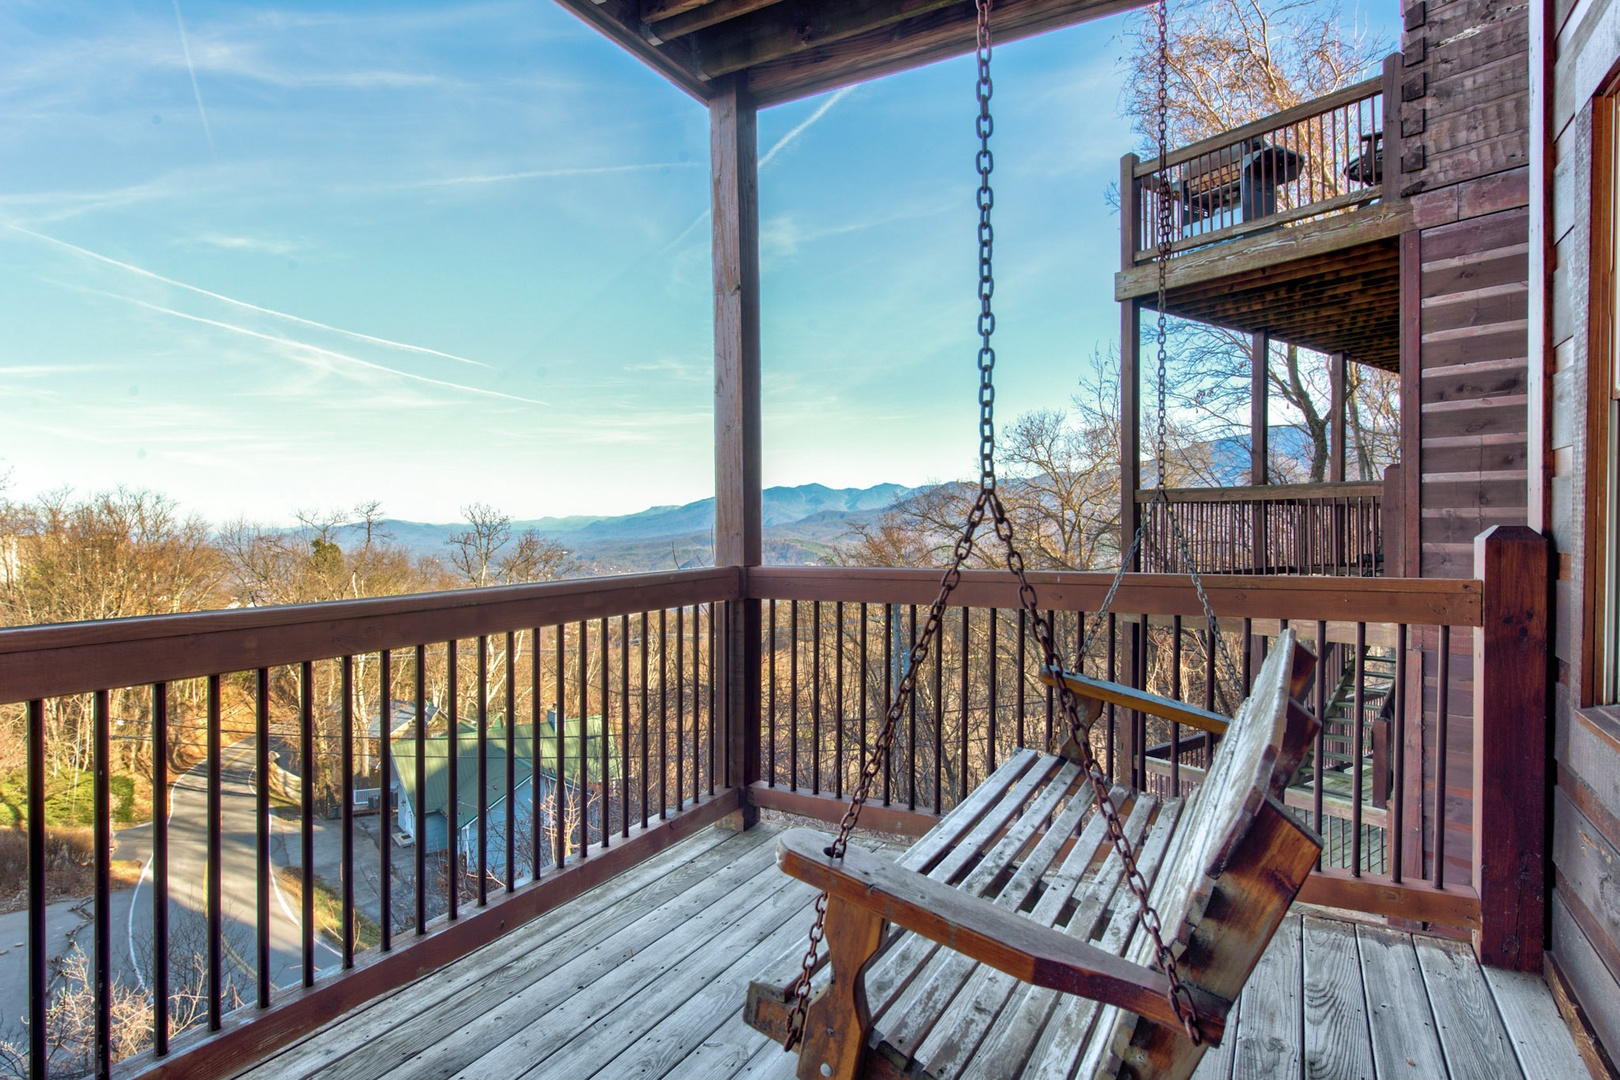 Sway the day away with a book or take in the view on the deck